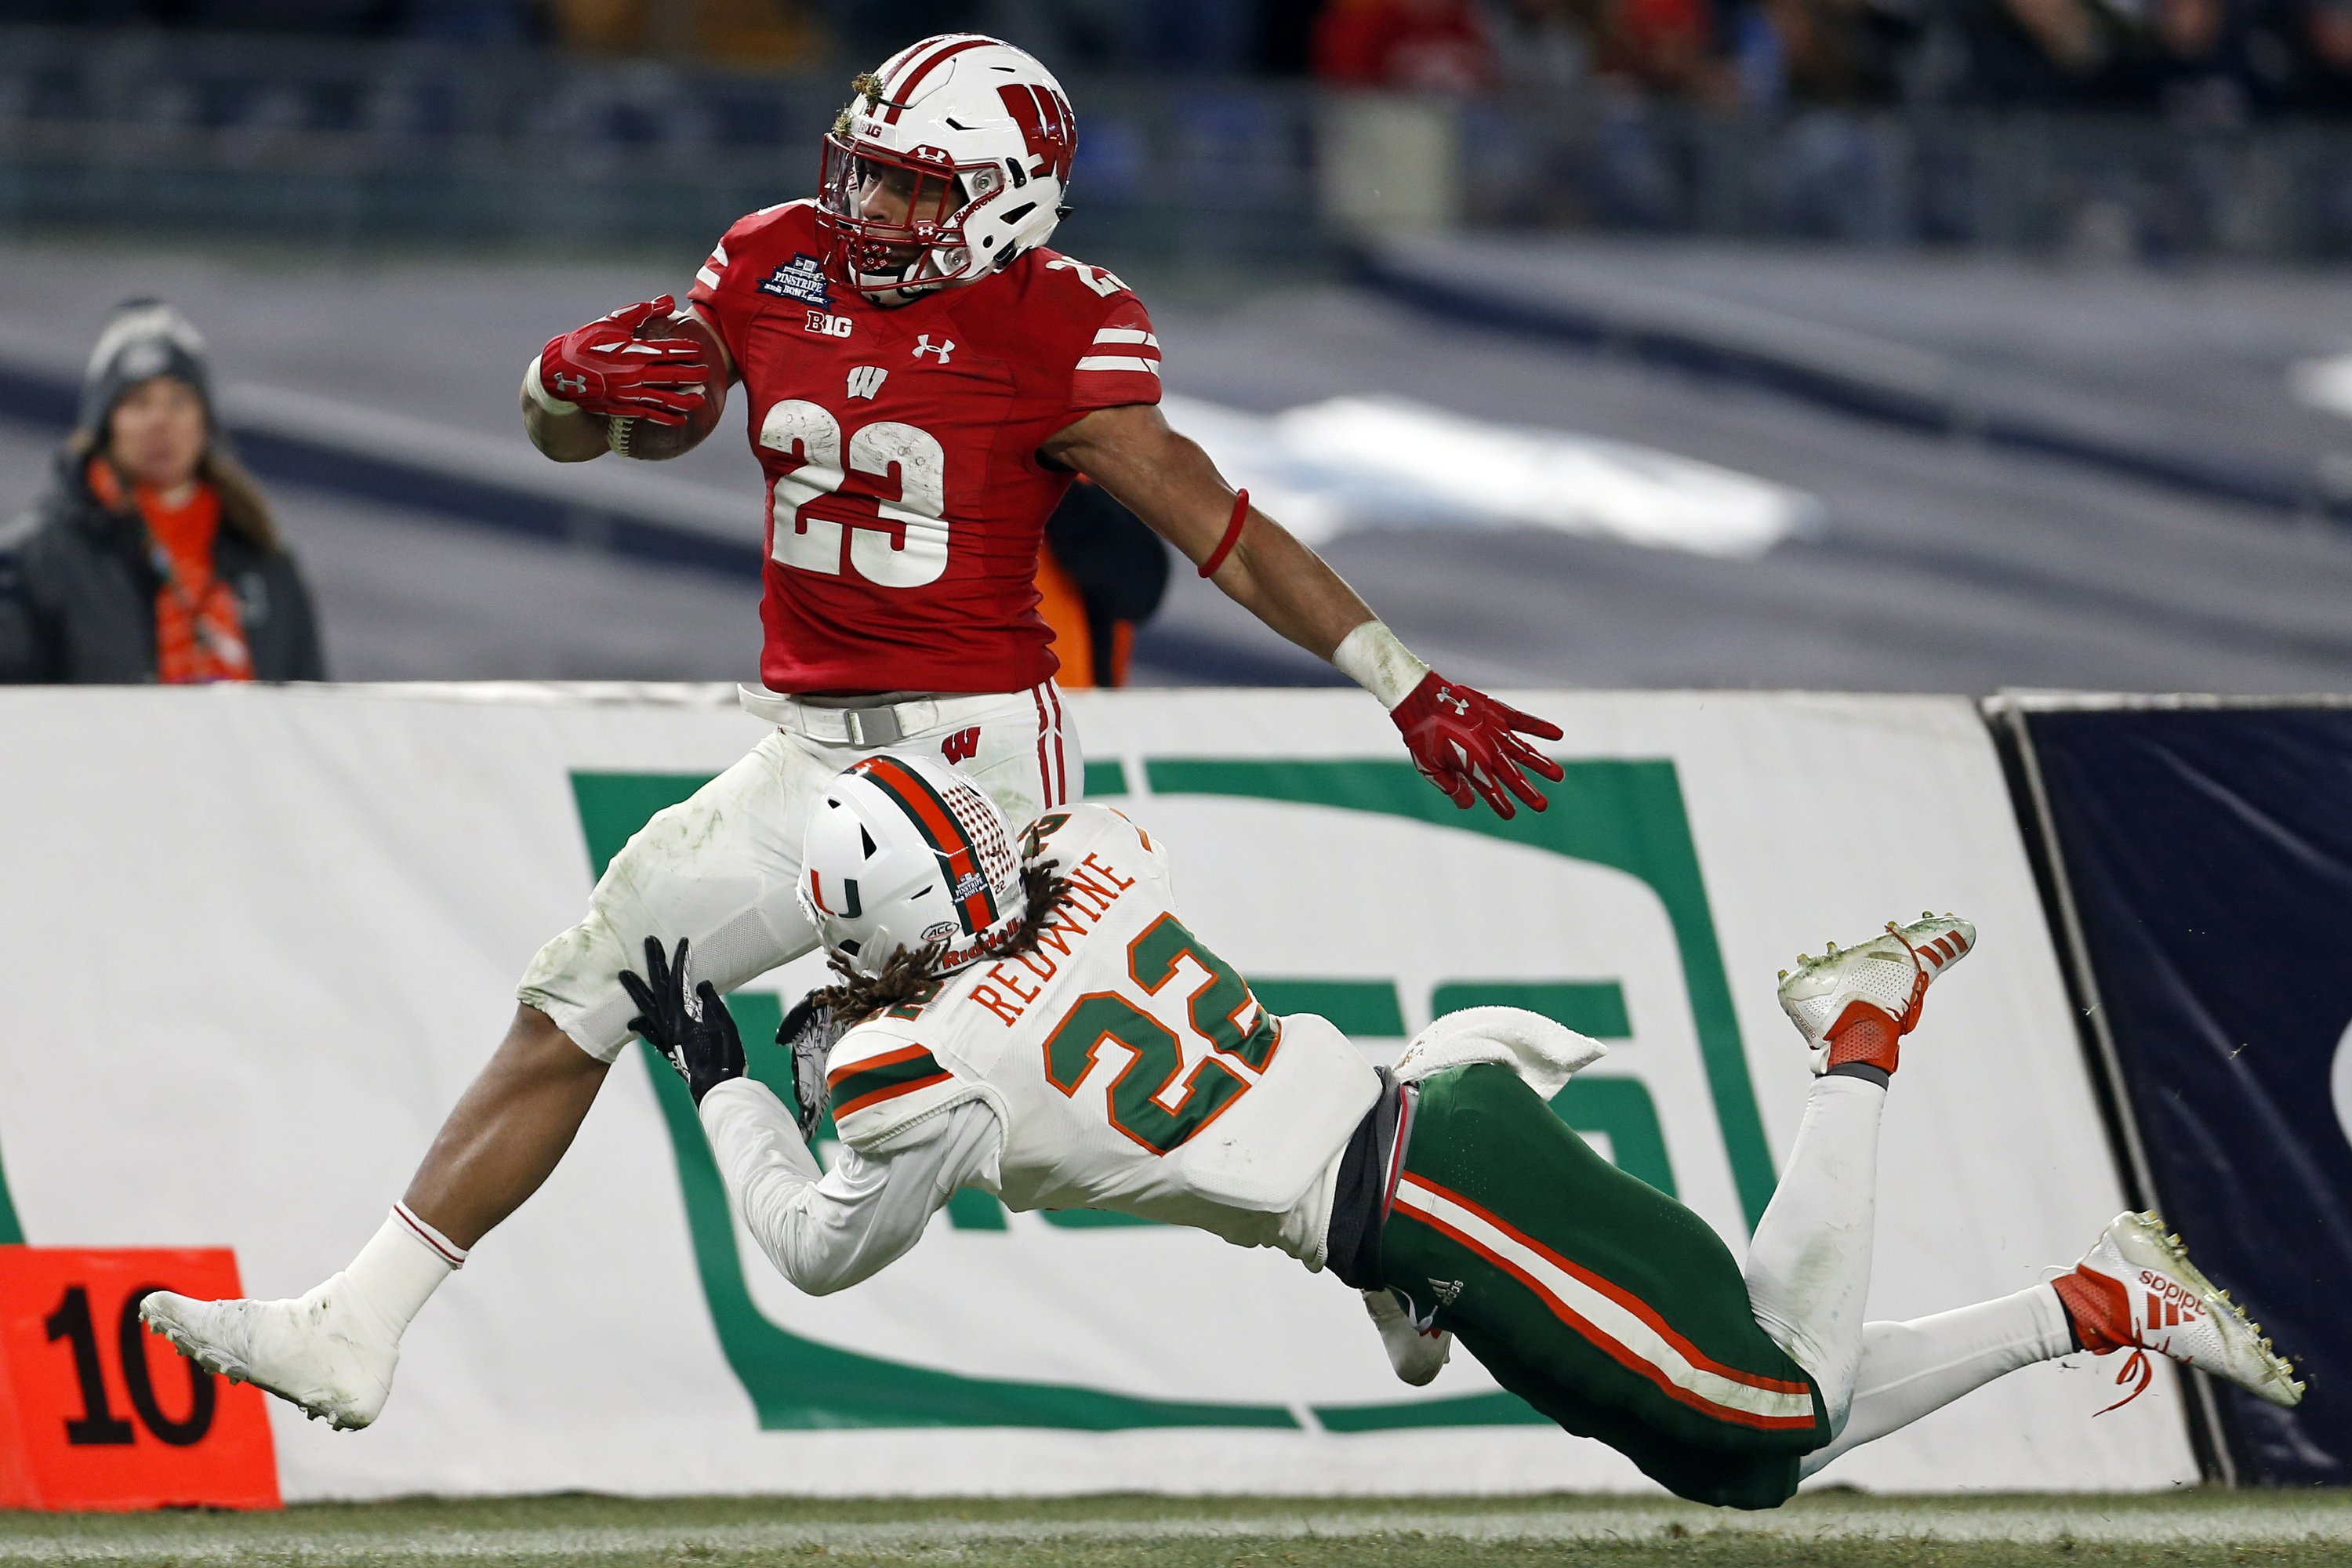 Pick Six: Top college awards could feature repeats